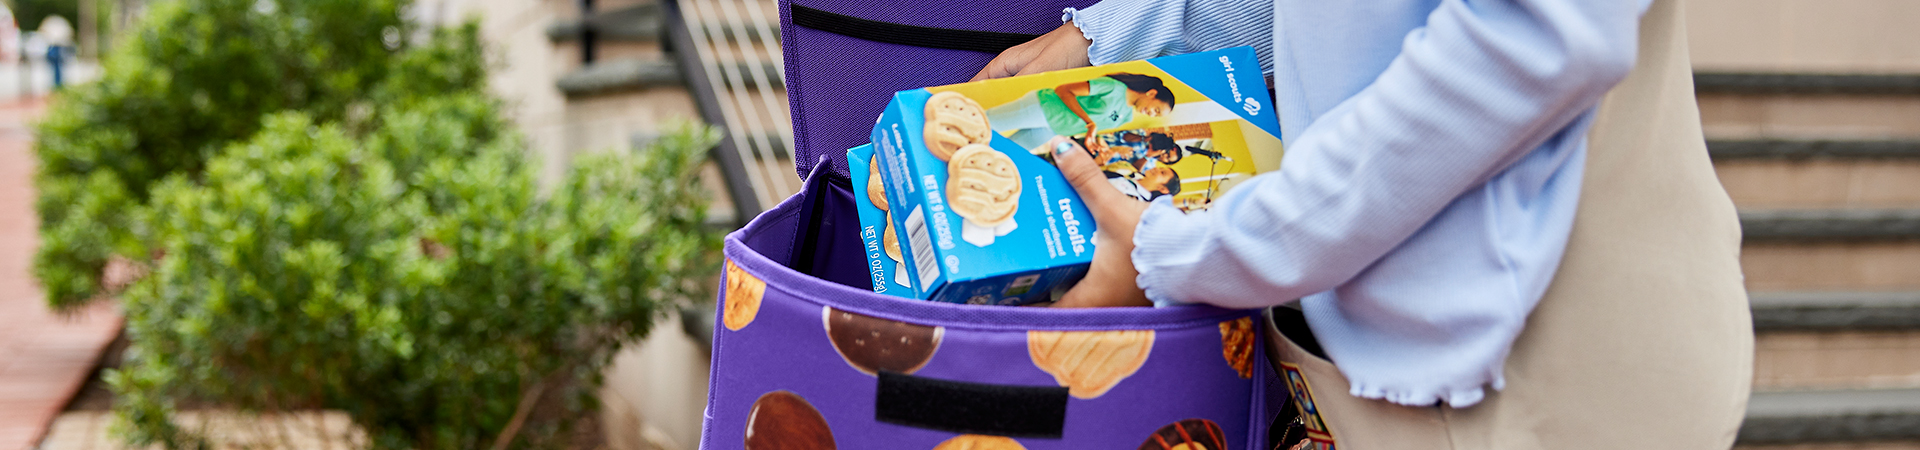  Girl scout Cookies being placed into a cookie cart 